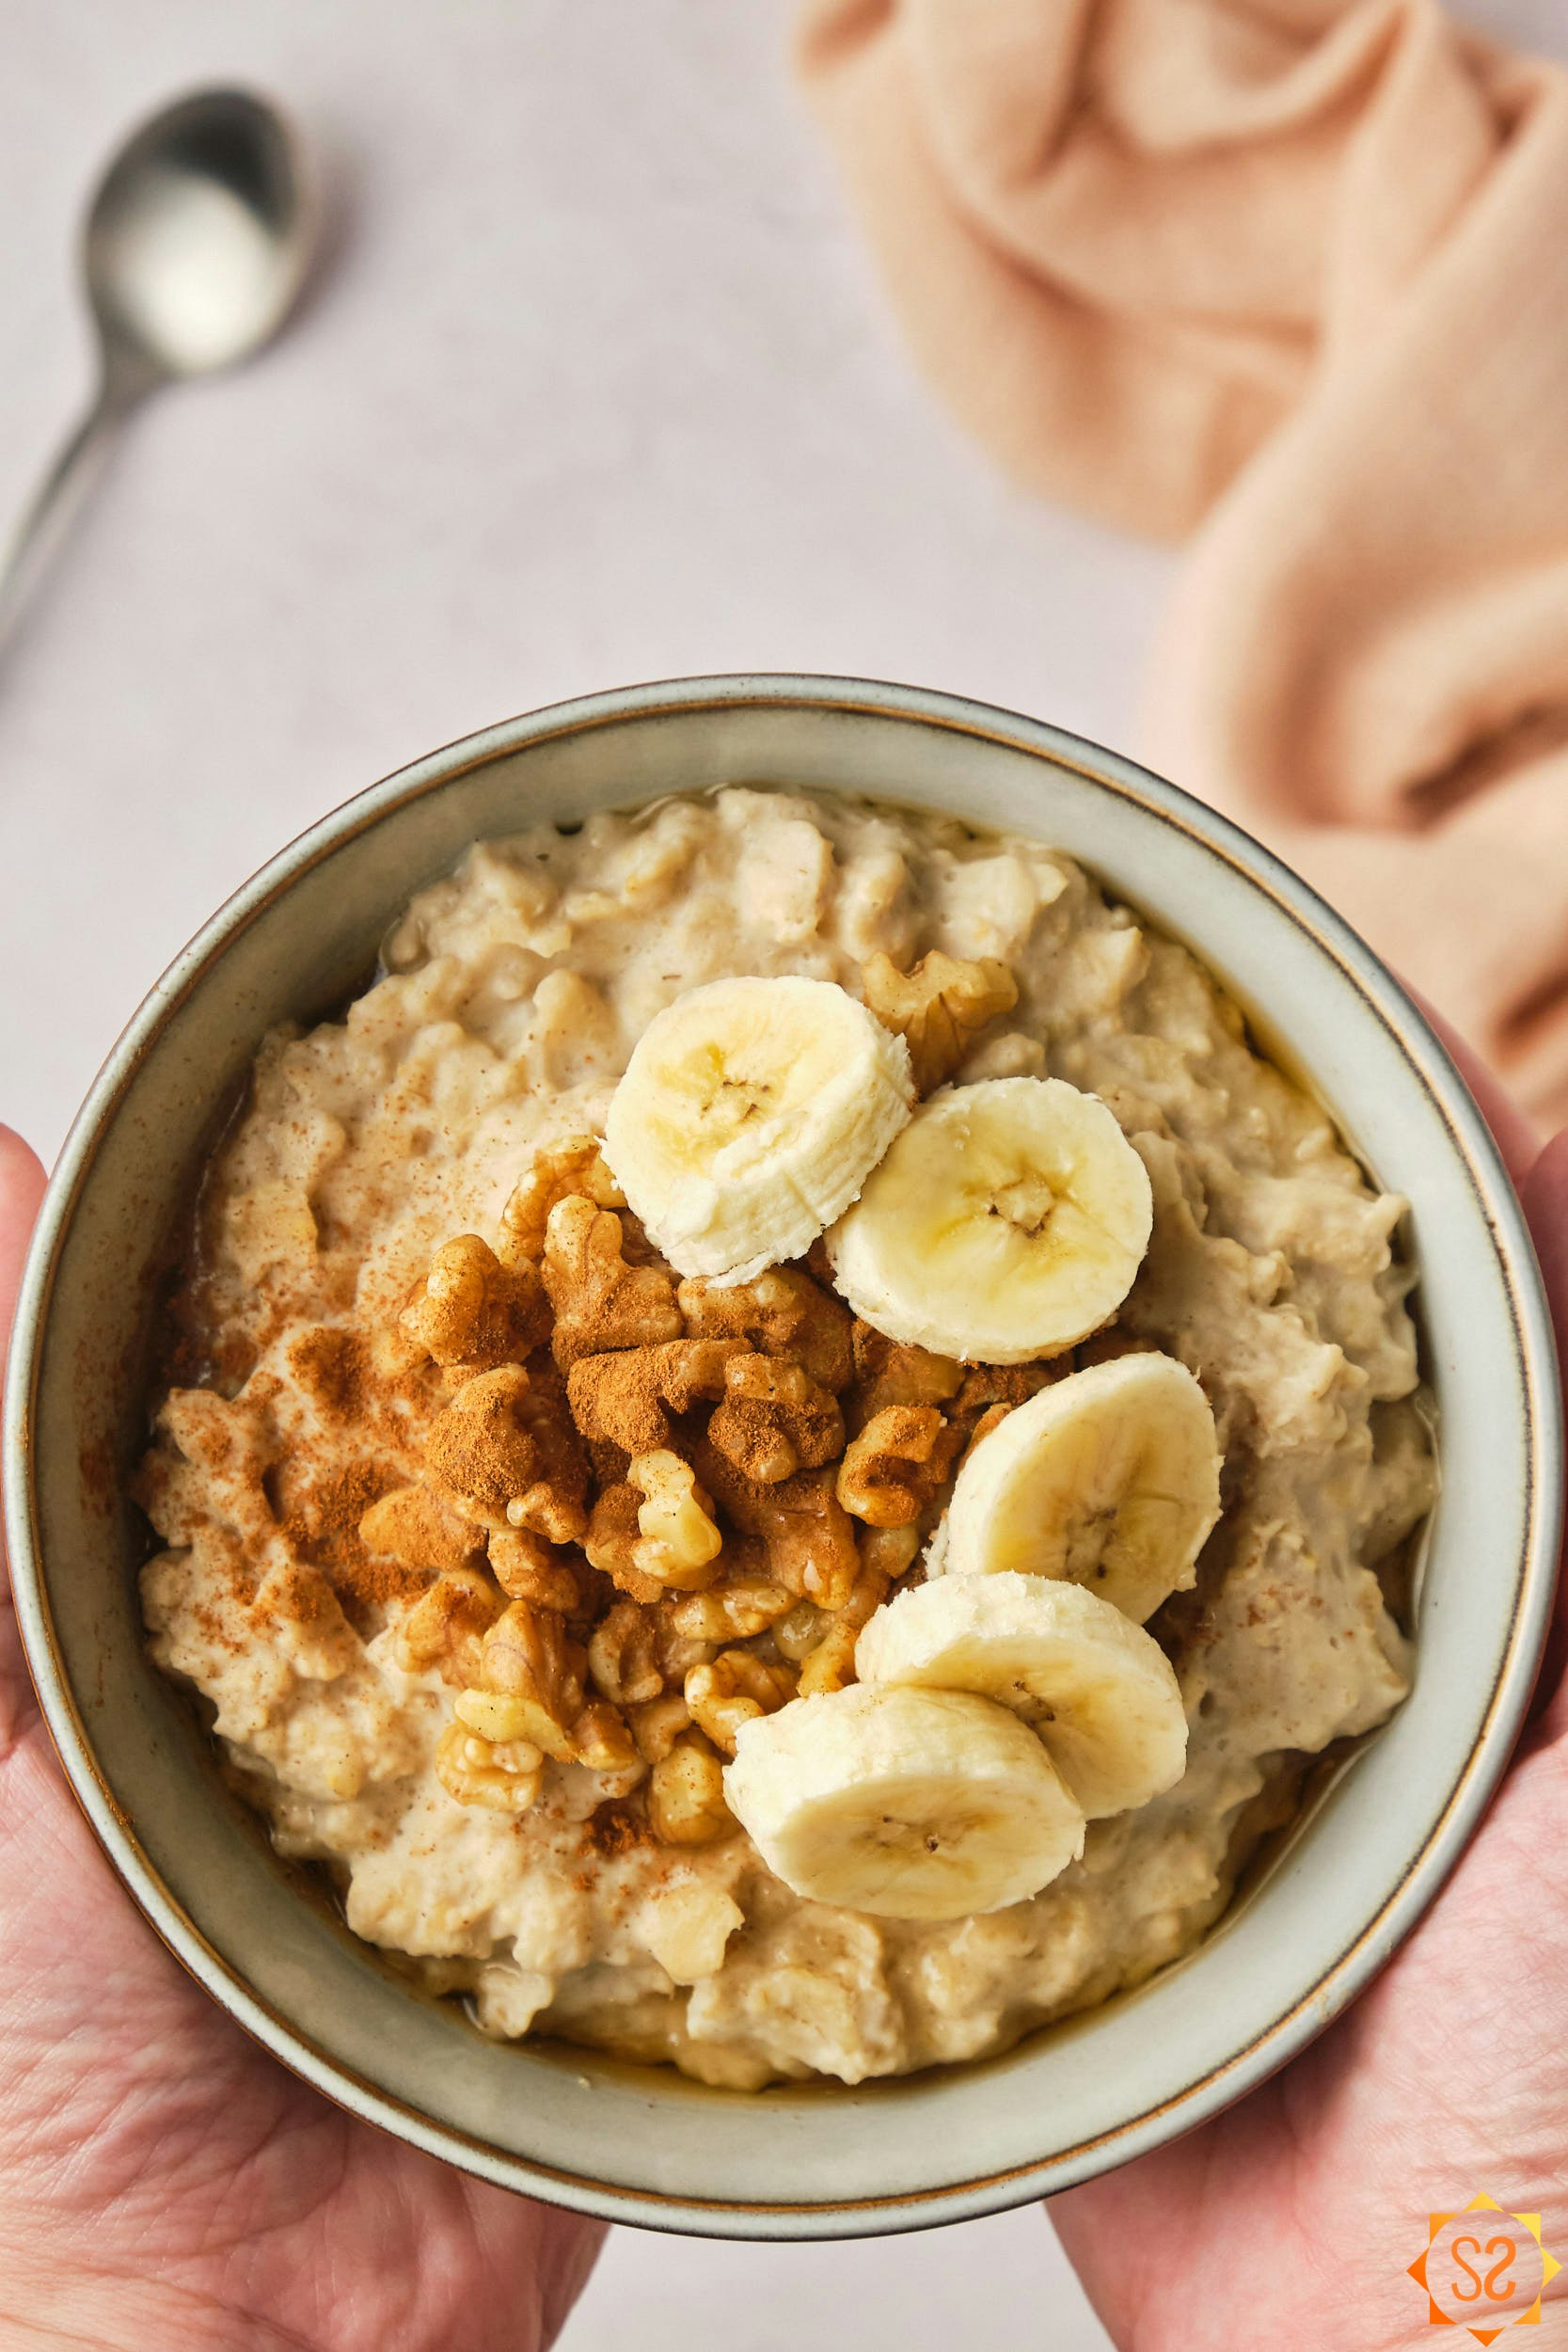 Two hands holding a bowl of protein oatmeal for a close view, topped with banana slices, peanut butter, and walnuts